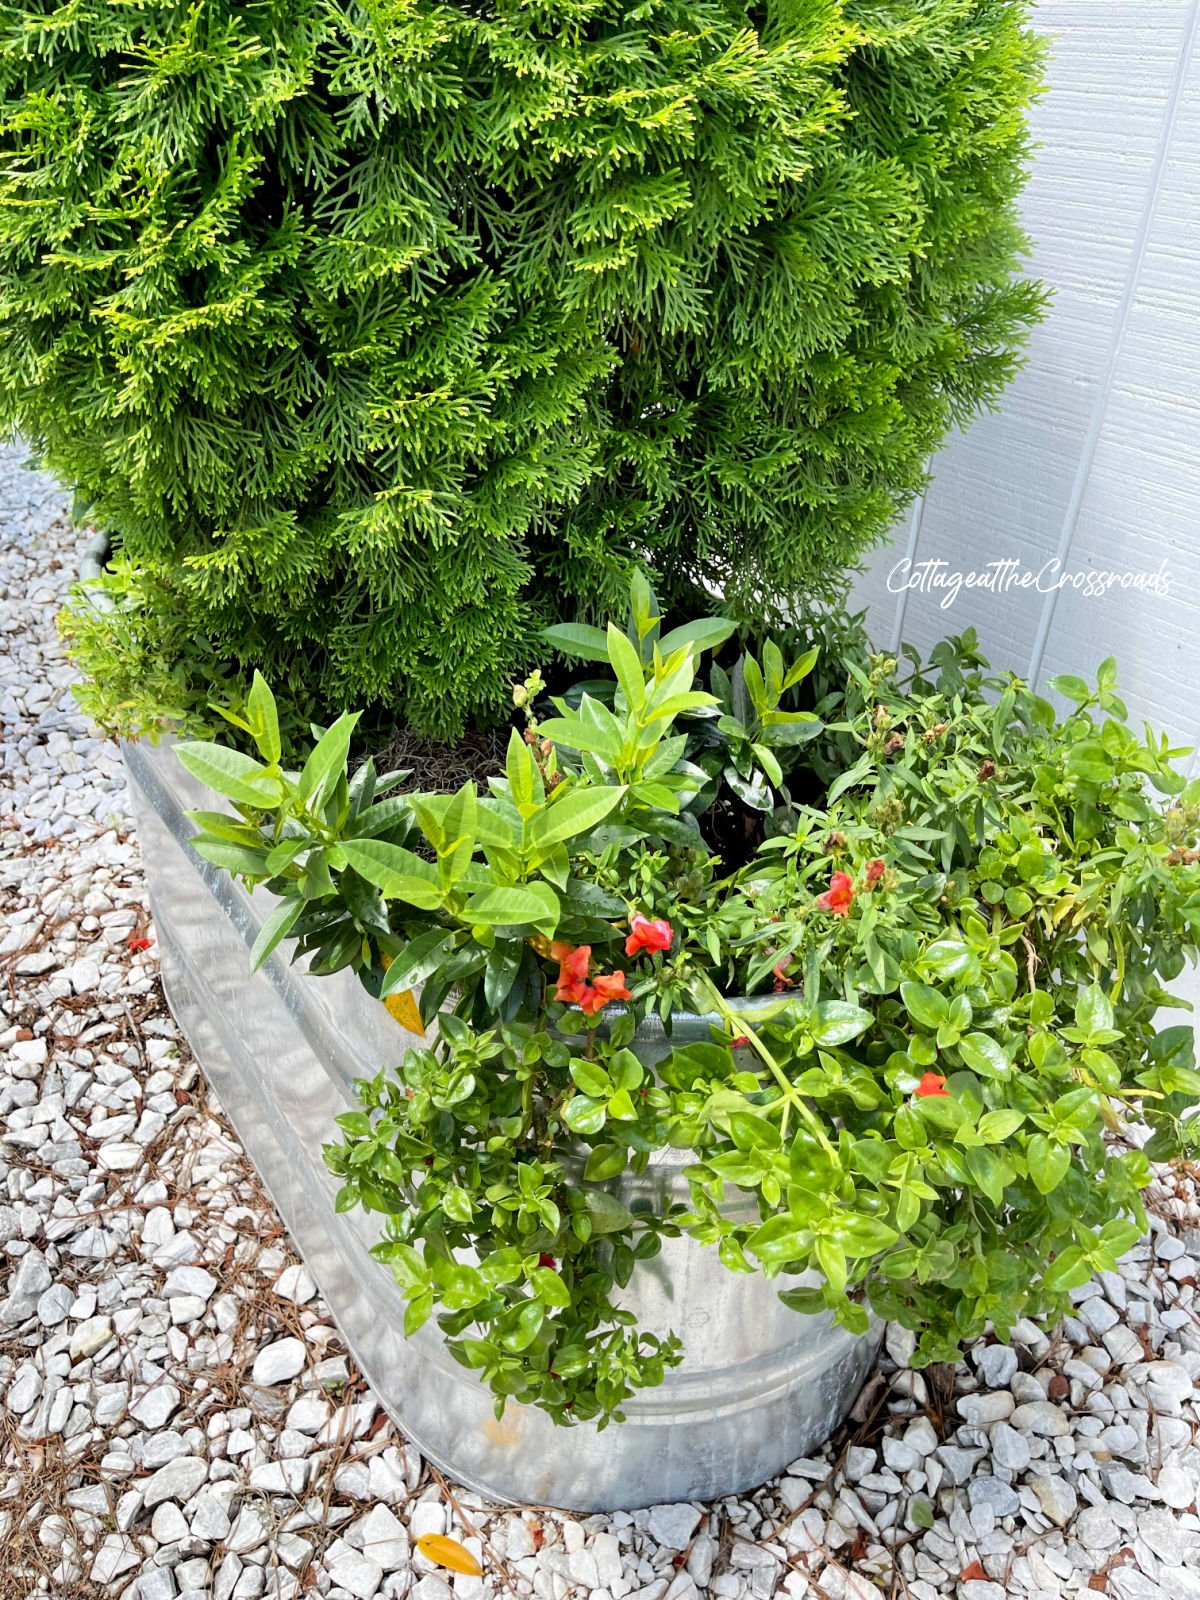 Snapdragons and other plants in a metal watering trough